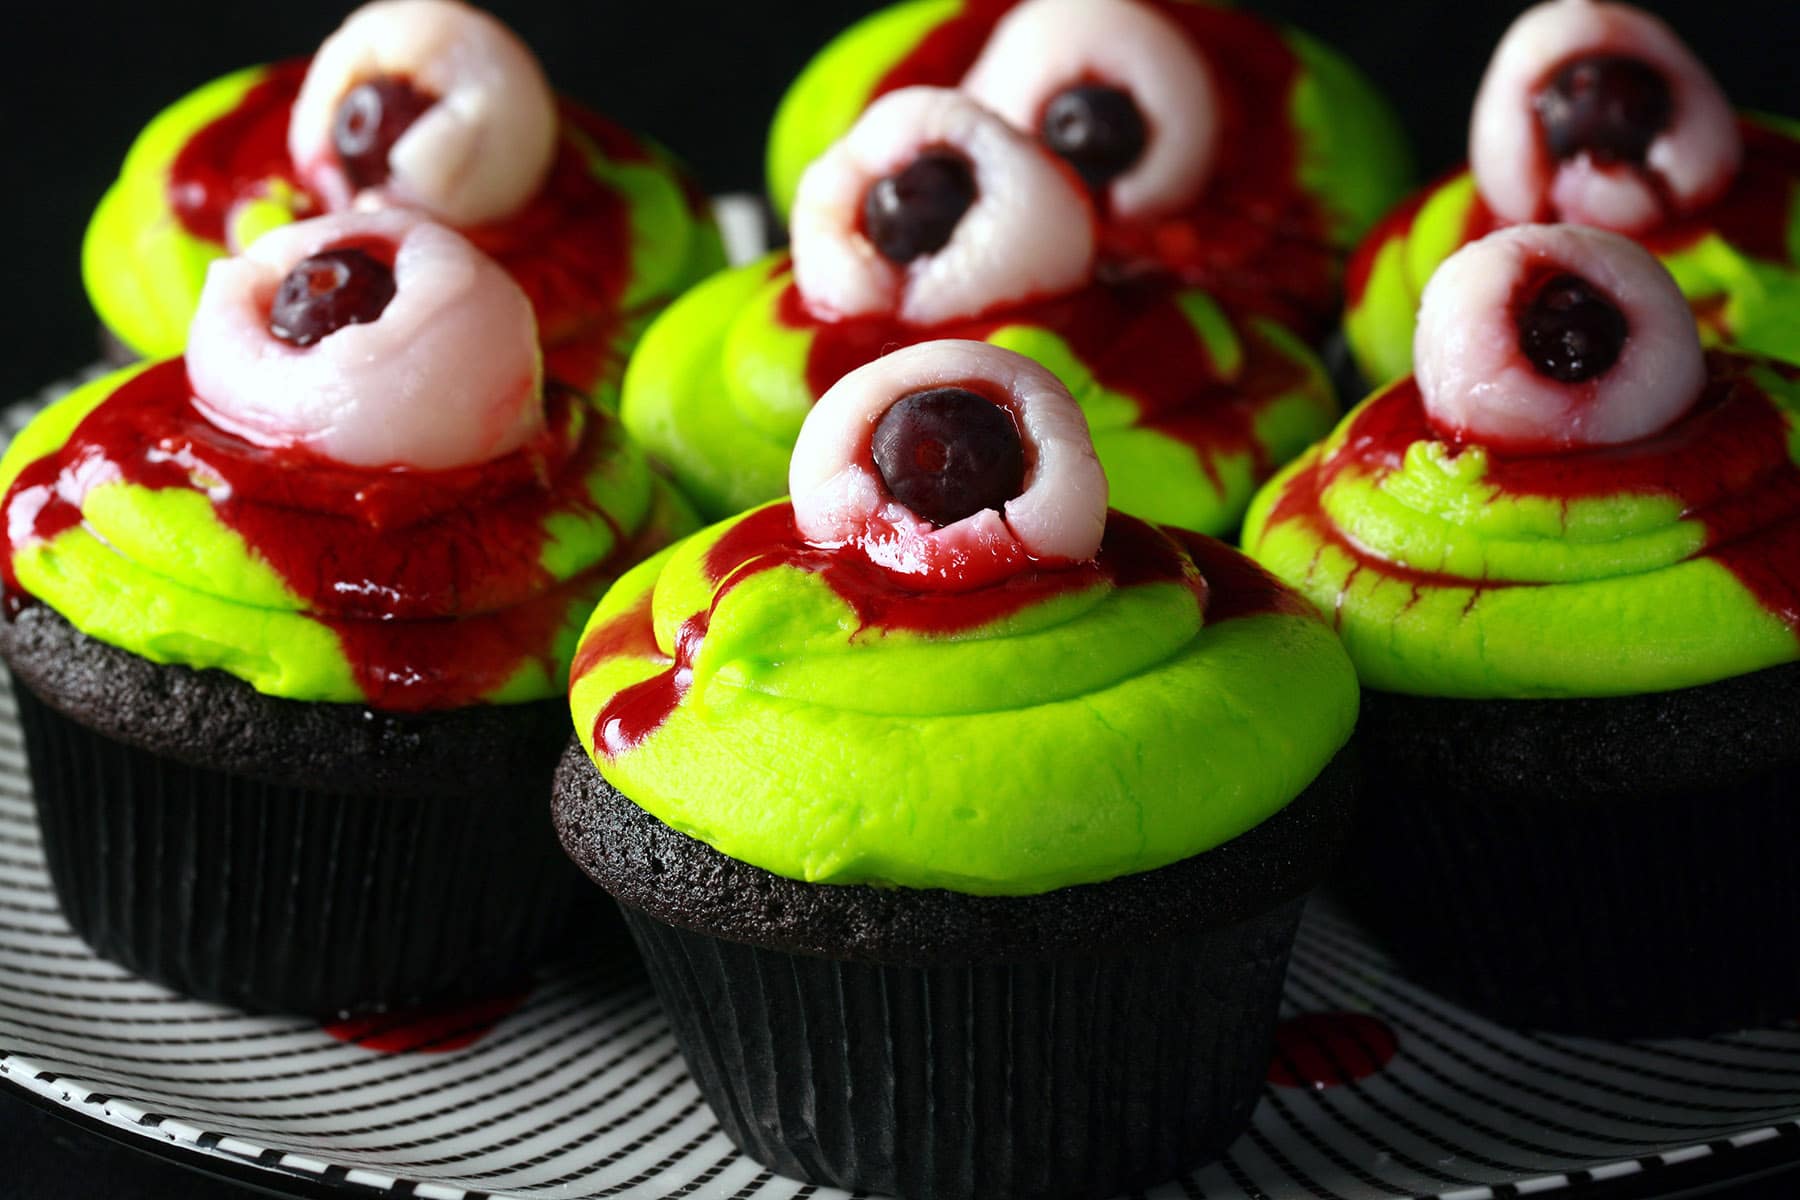 Several Halloween cupcakes on a plate. They have neon green frosting and a lychee eyeball on top.